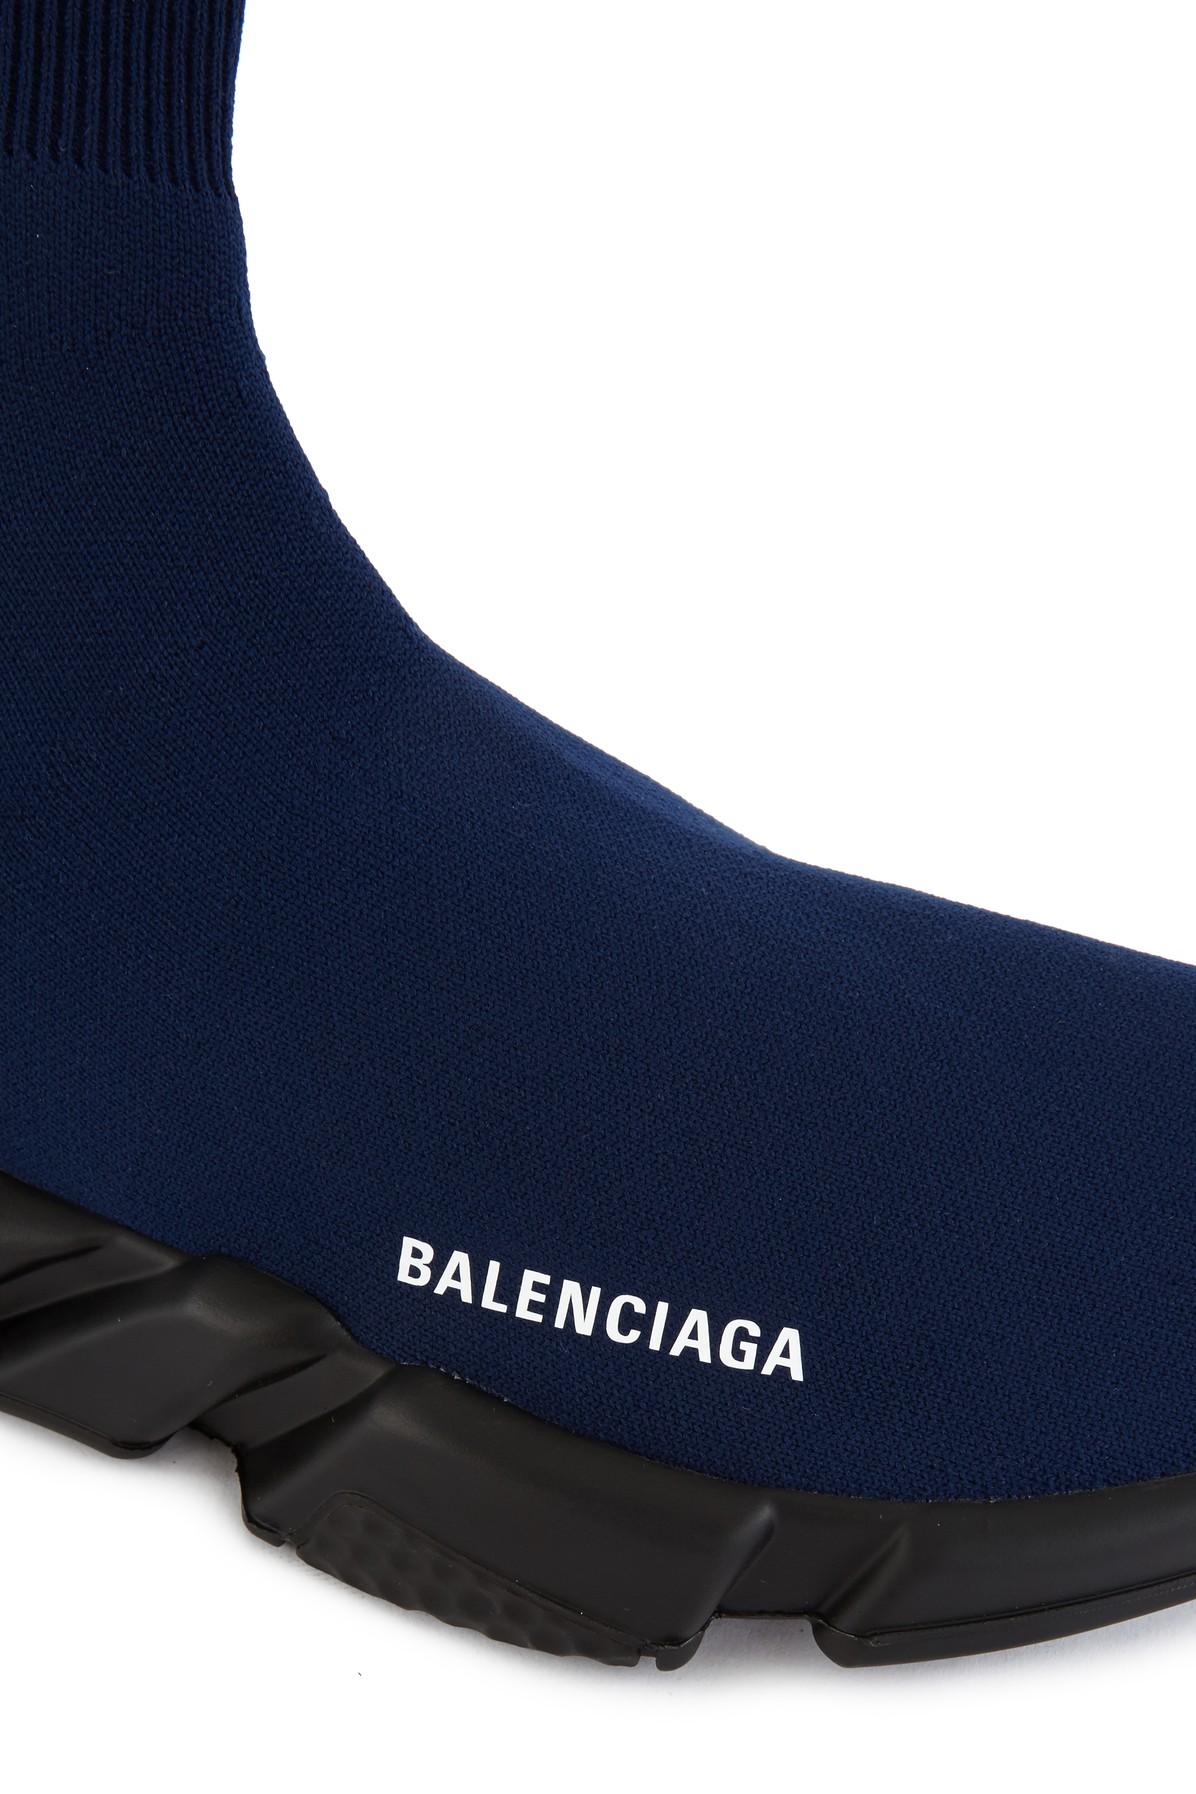 Balenciaga Speed Trainer Navy France, SAVE 44% - aveclumiere.com